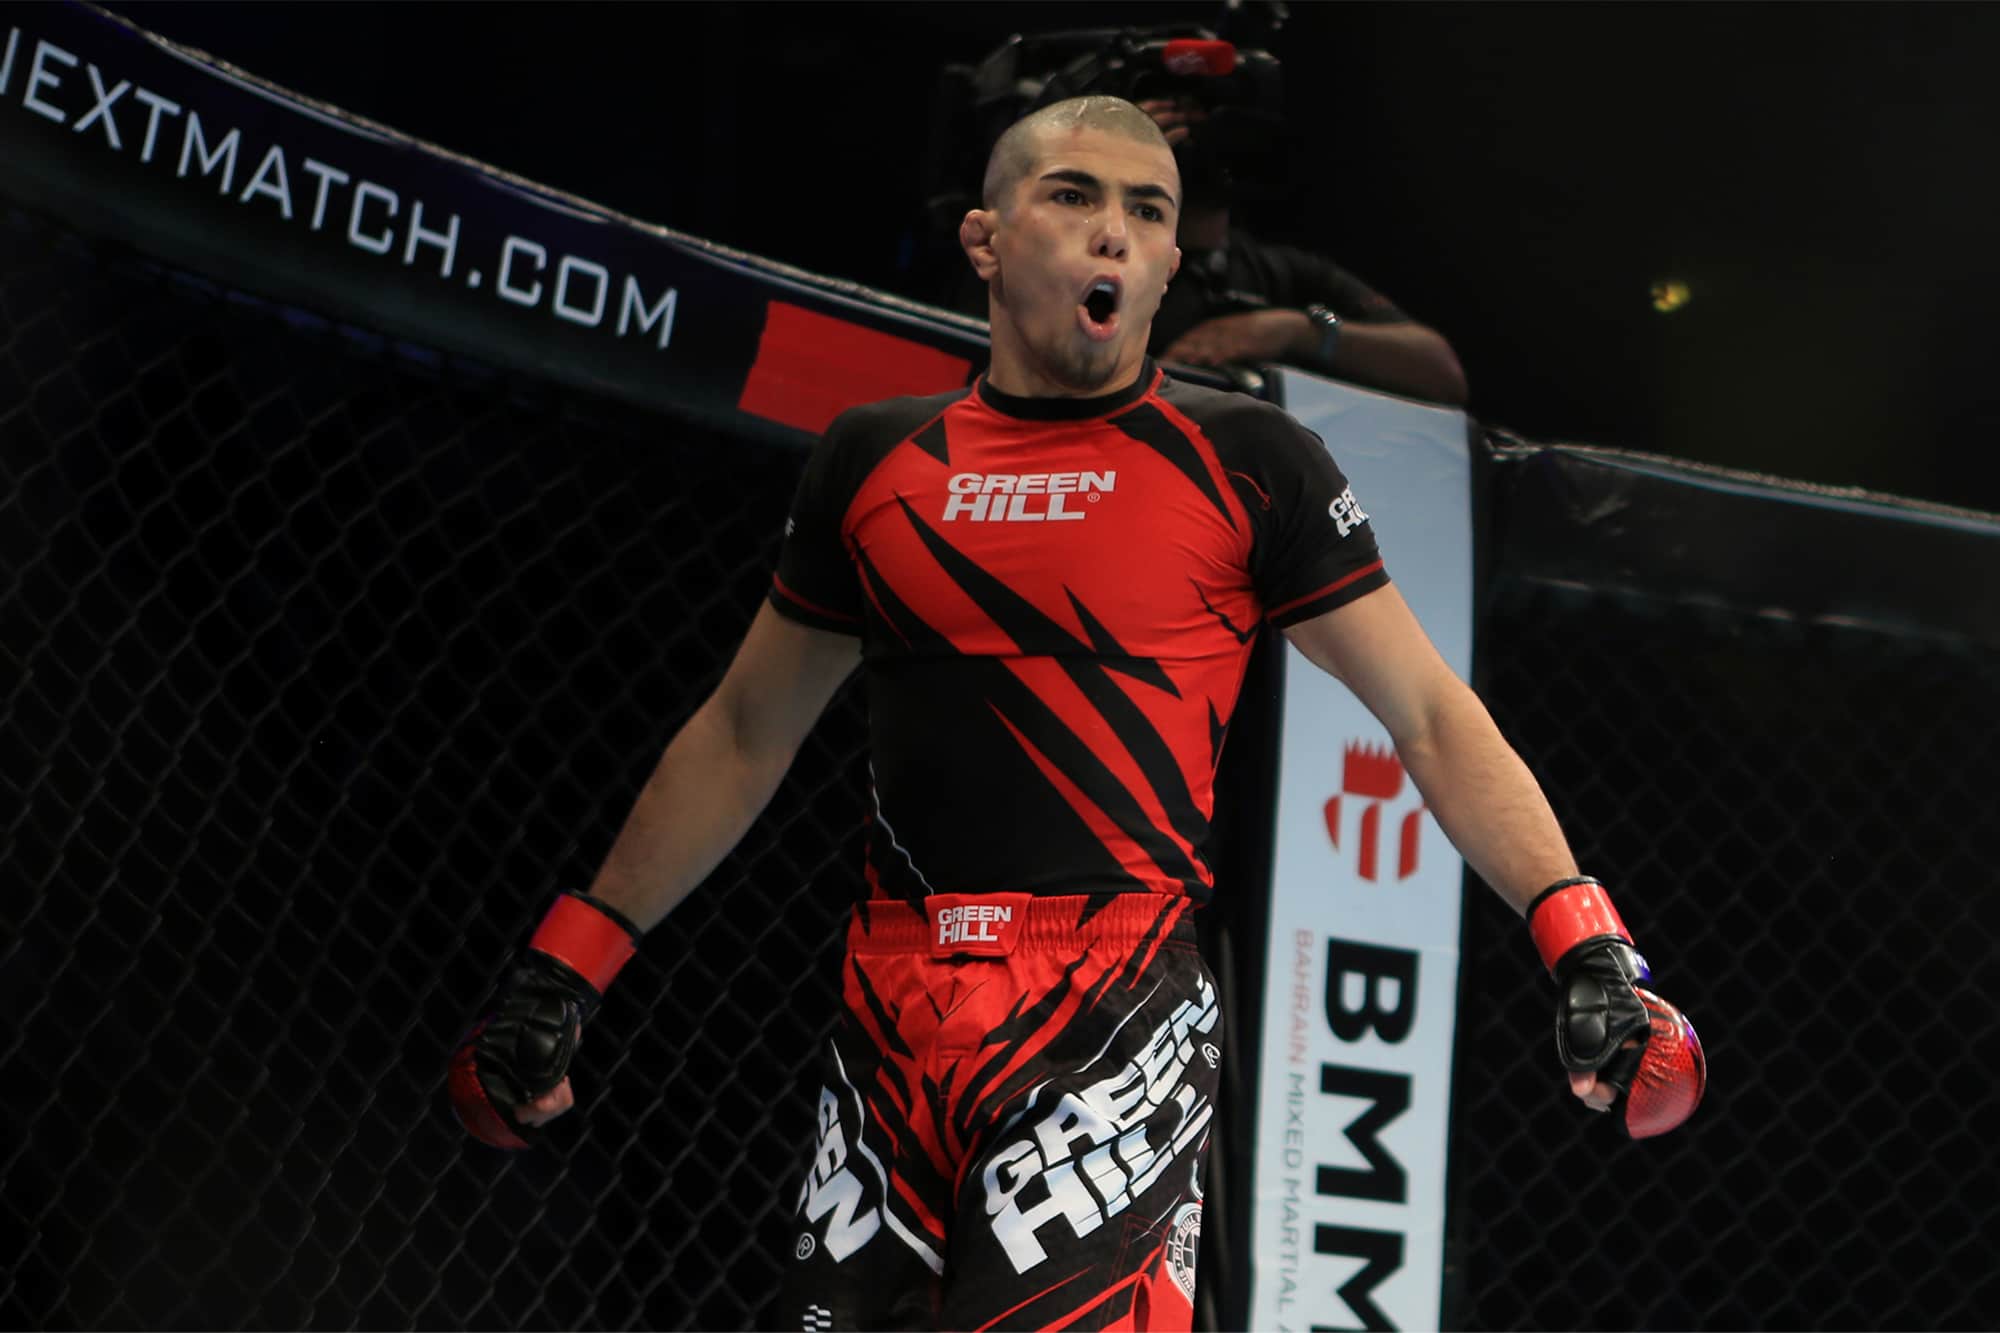 Standout IMMAF champions Manon Fiorot and Muhammad Mokaev return to MMA competition